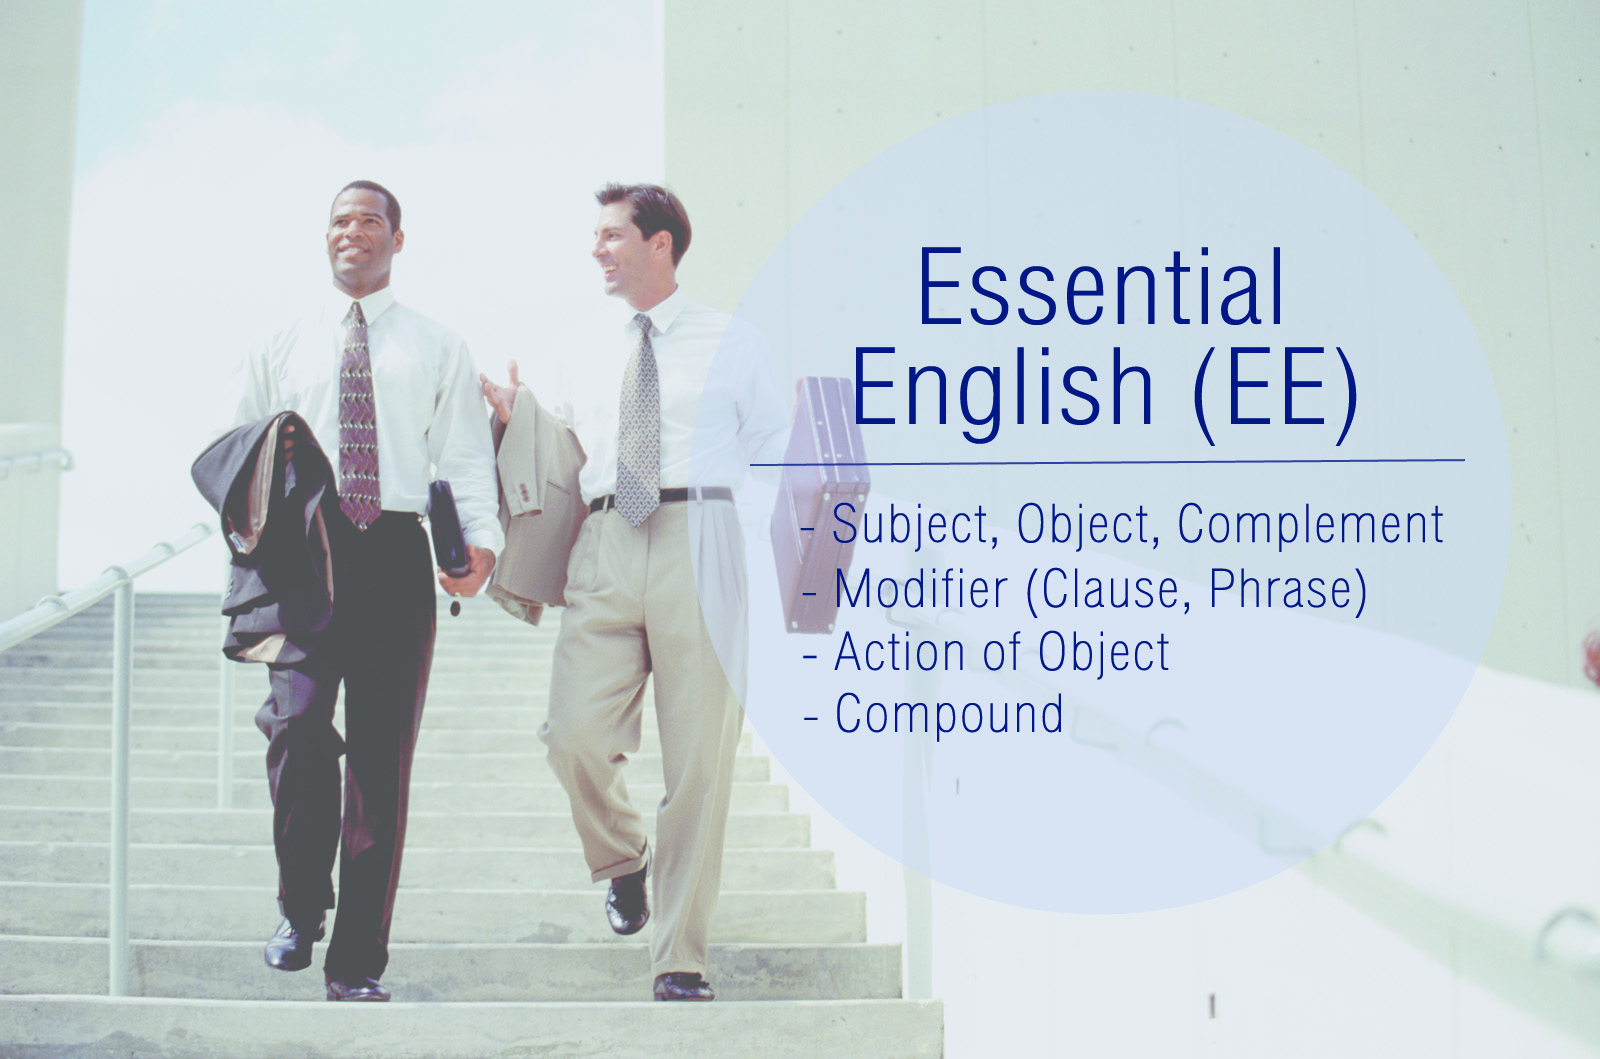 Essential English (EE)